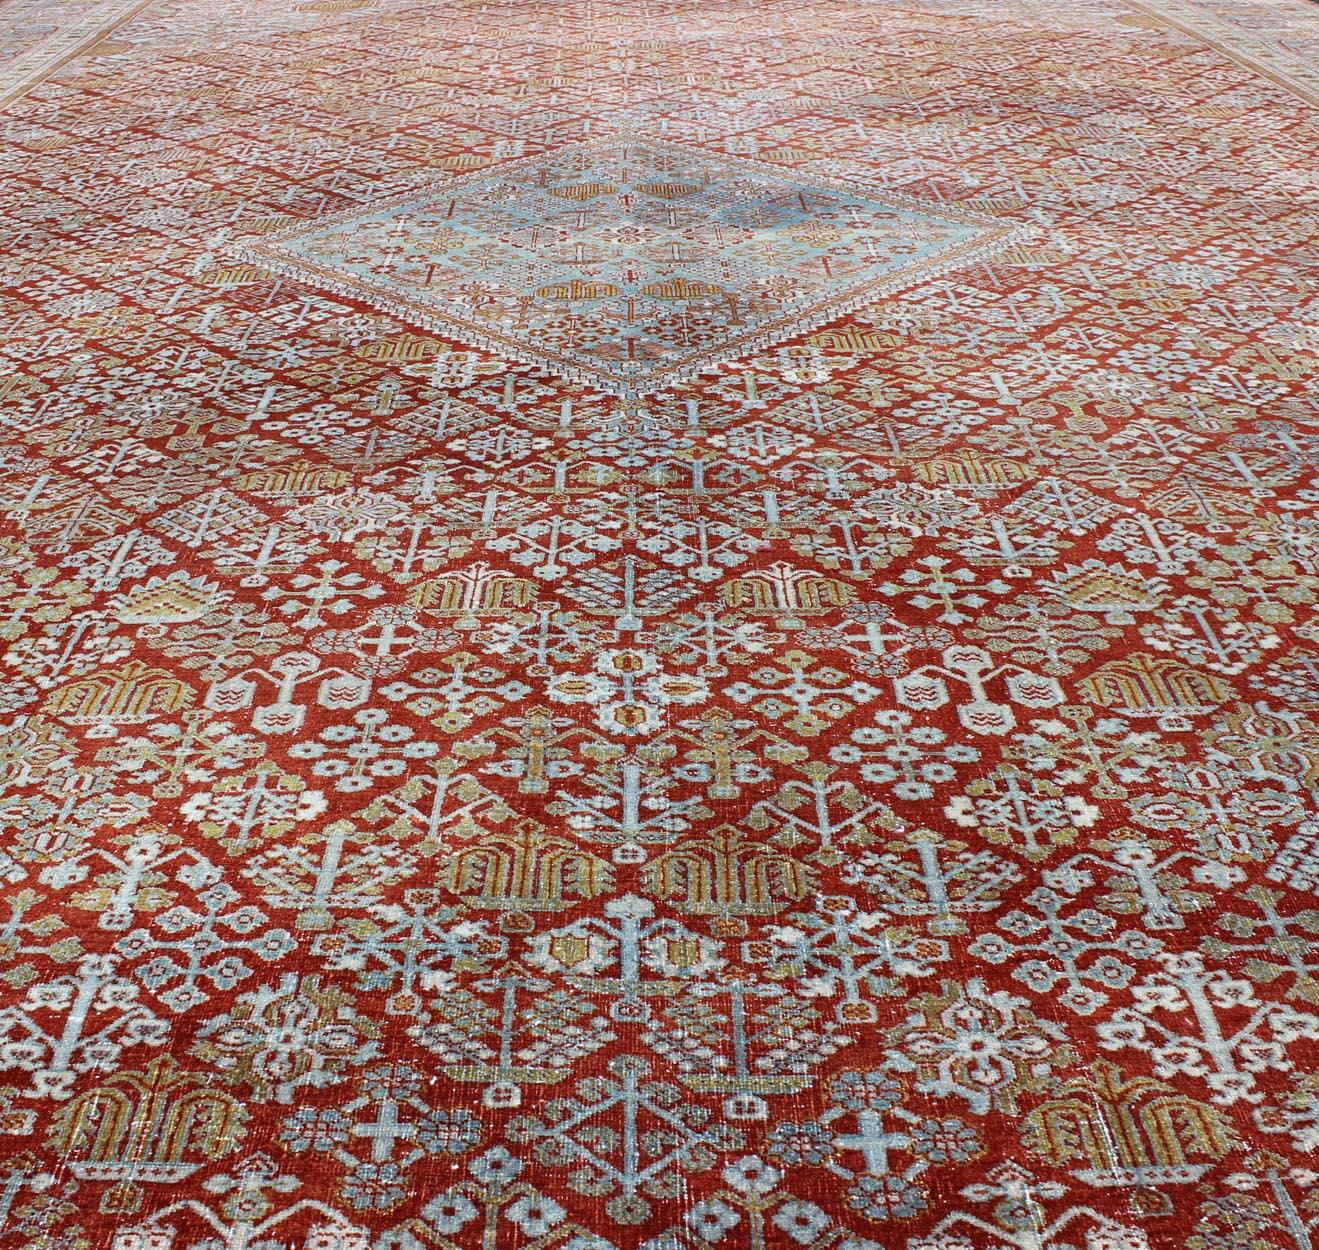 Early 20th Century Large Antique Persian Joshegan Rug in Rust Red, Light Blue, Green, Gold & Olive For Sale